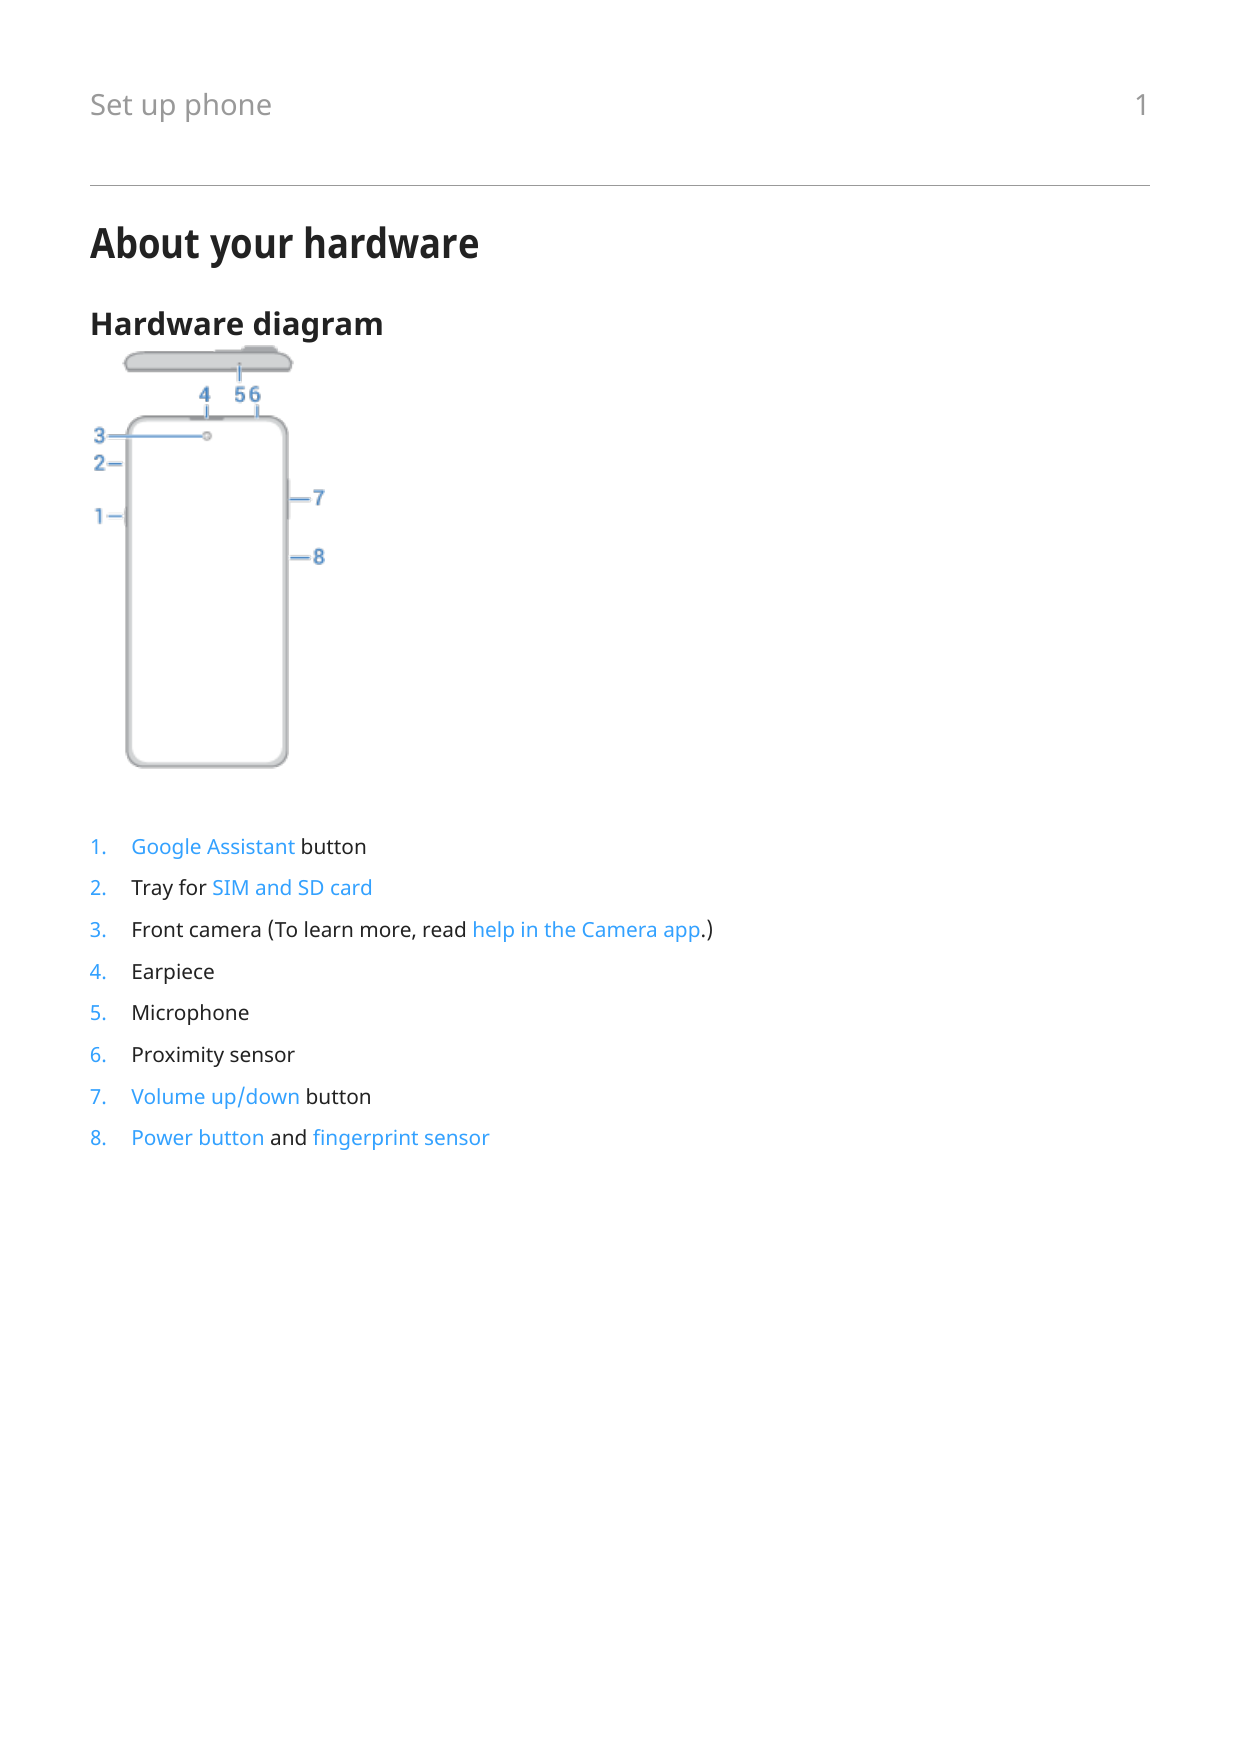 Set up phoneAbout your hardwareHardware diagram1.Google Assistant button2.Tray for SIM and SD card3.Front camera (To learn more,